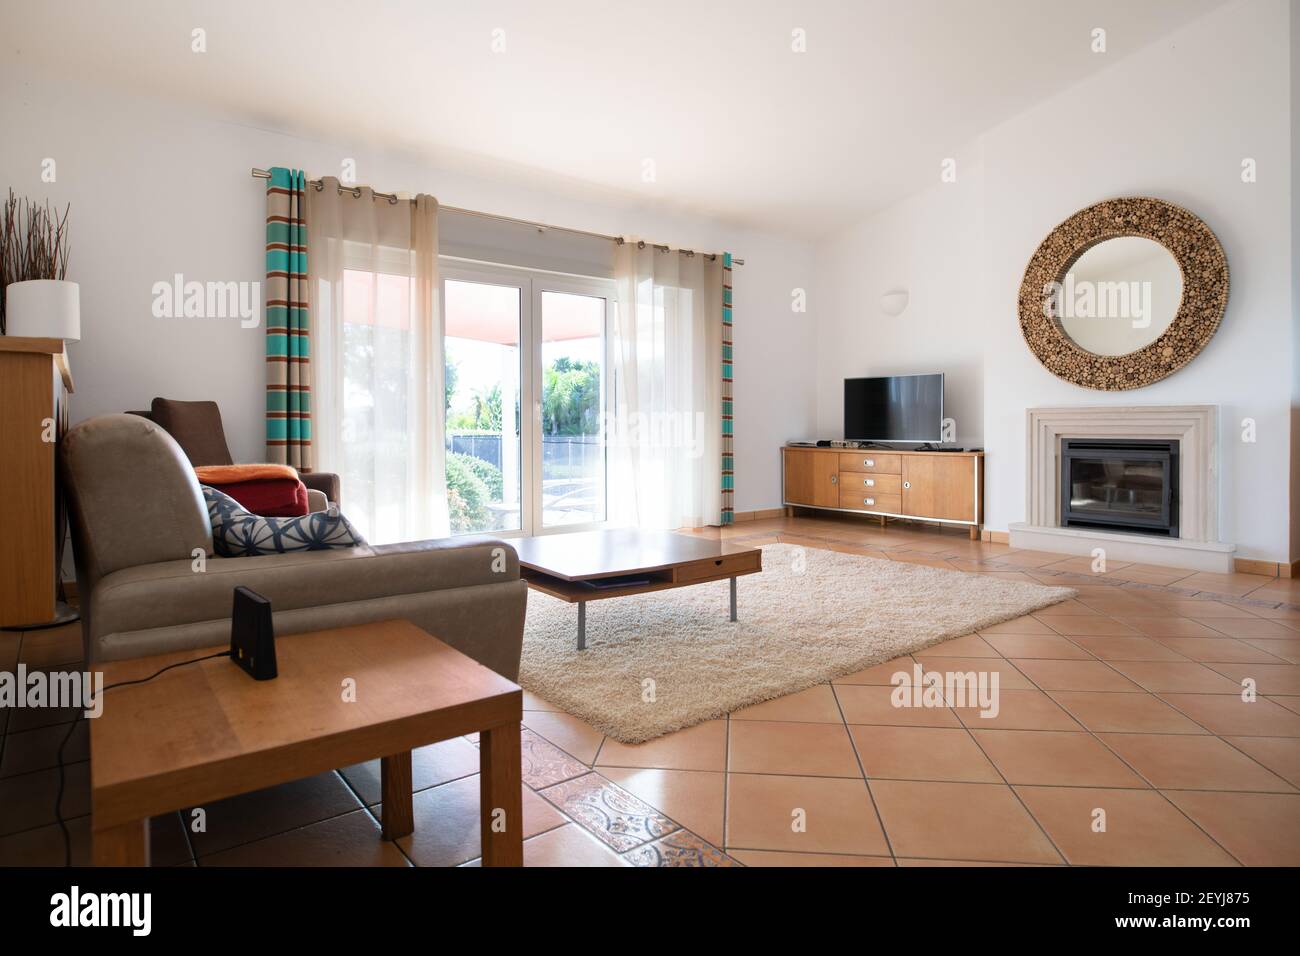 Living room with tiled floors, patio doors and high sloping ceiling Stock Photo